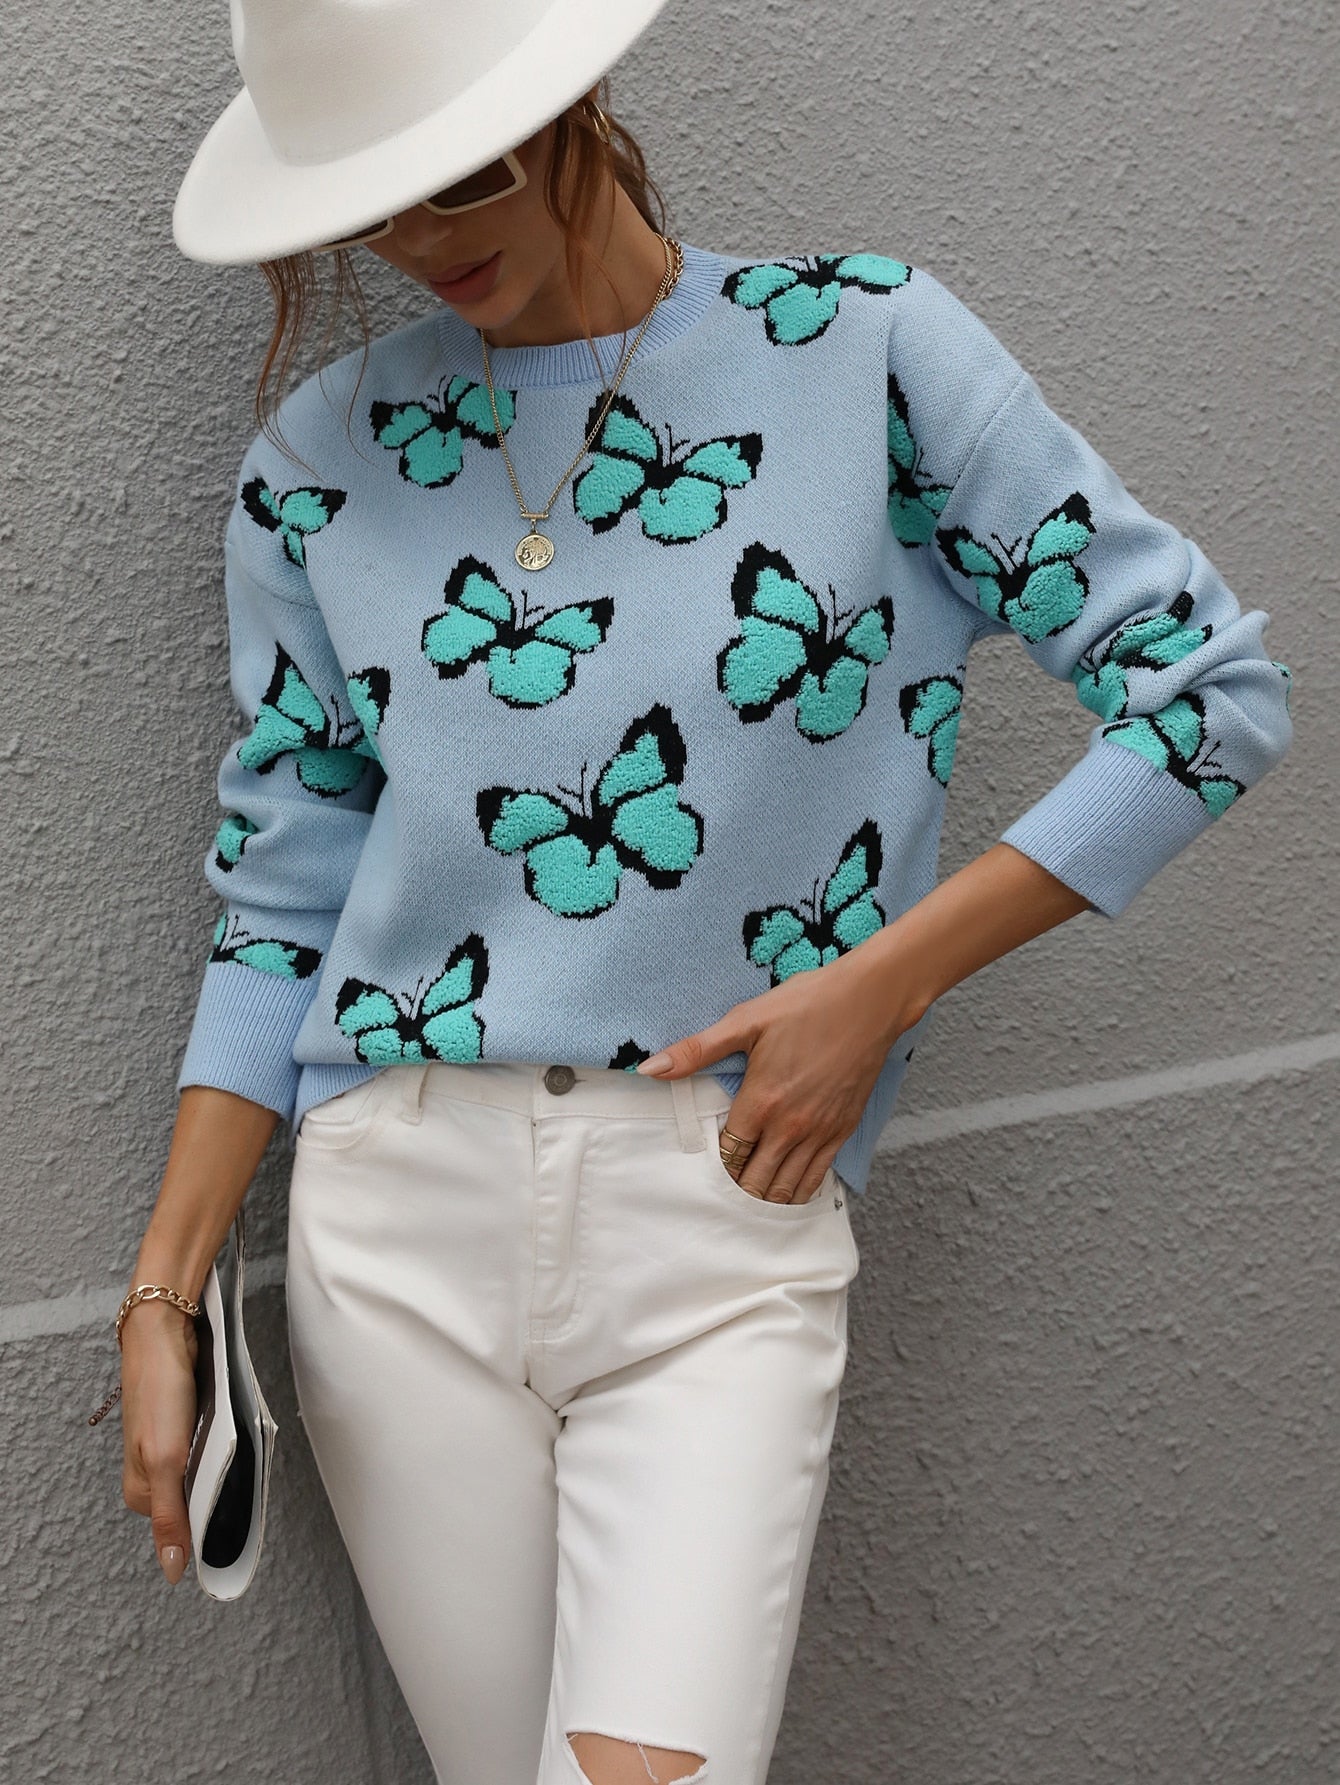 O Neck Butterfly Print Sweater Women Long Sleeve Knitted Sweaters Autumn Winter Pullover Ladies Tops Loose Jumper Pull Femme